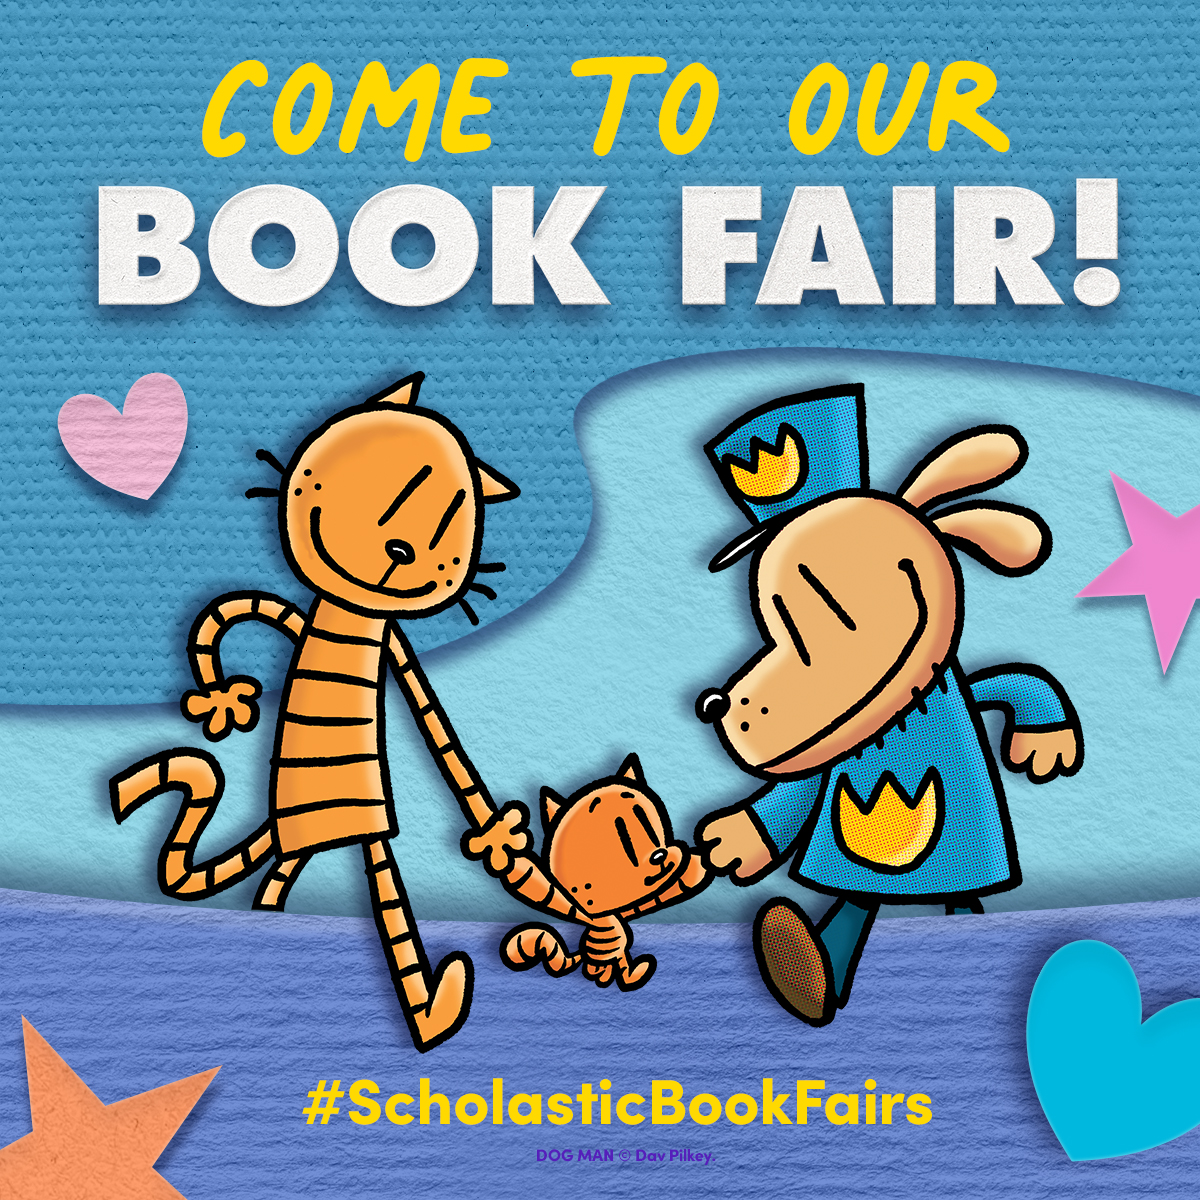 PES Fall In-Person Scholastic Book Fair - Payson Elementary School